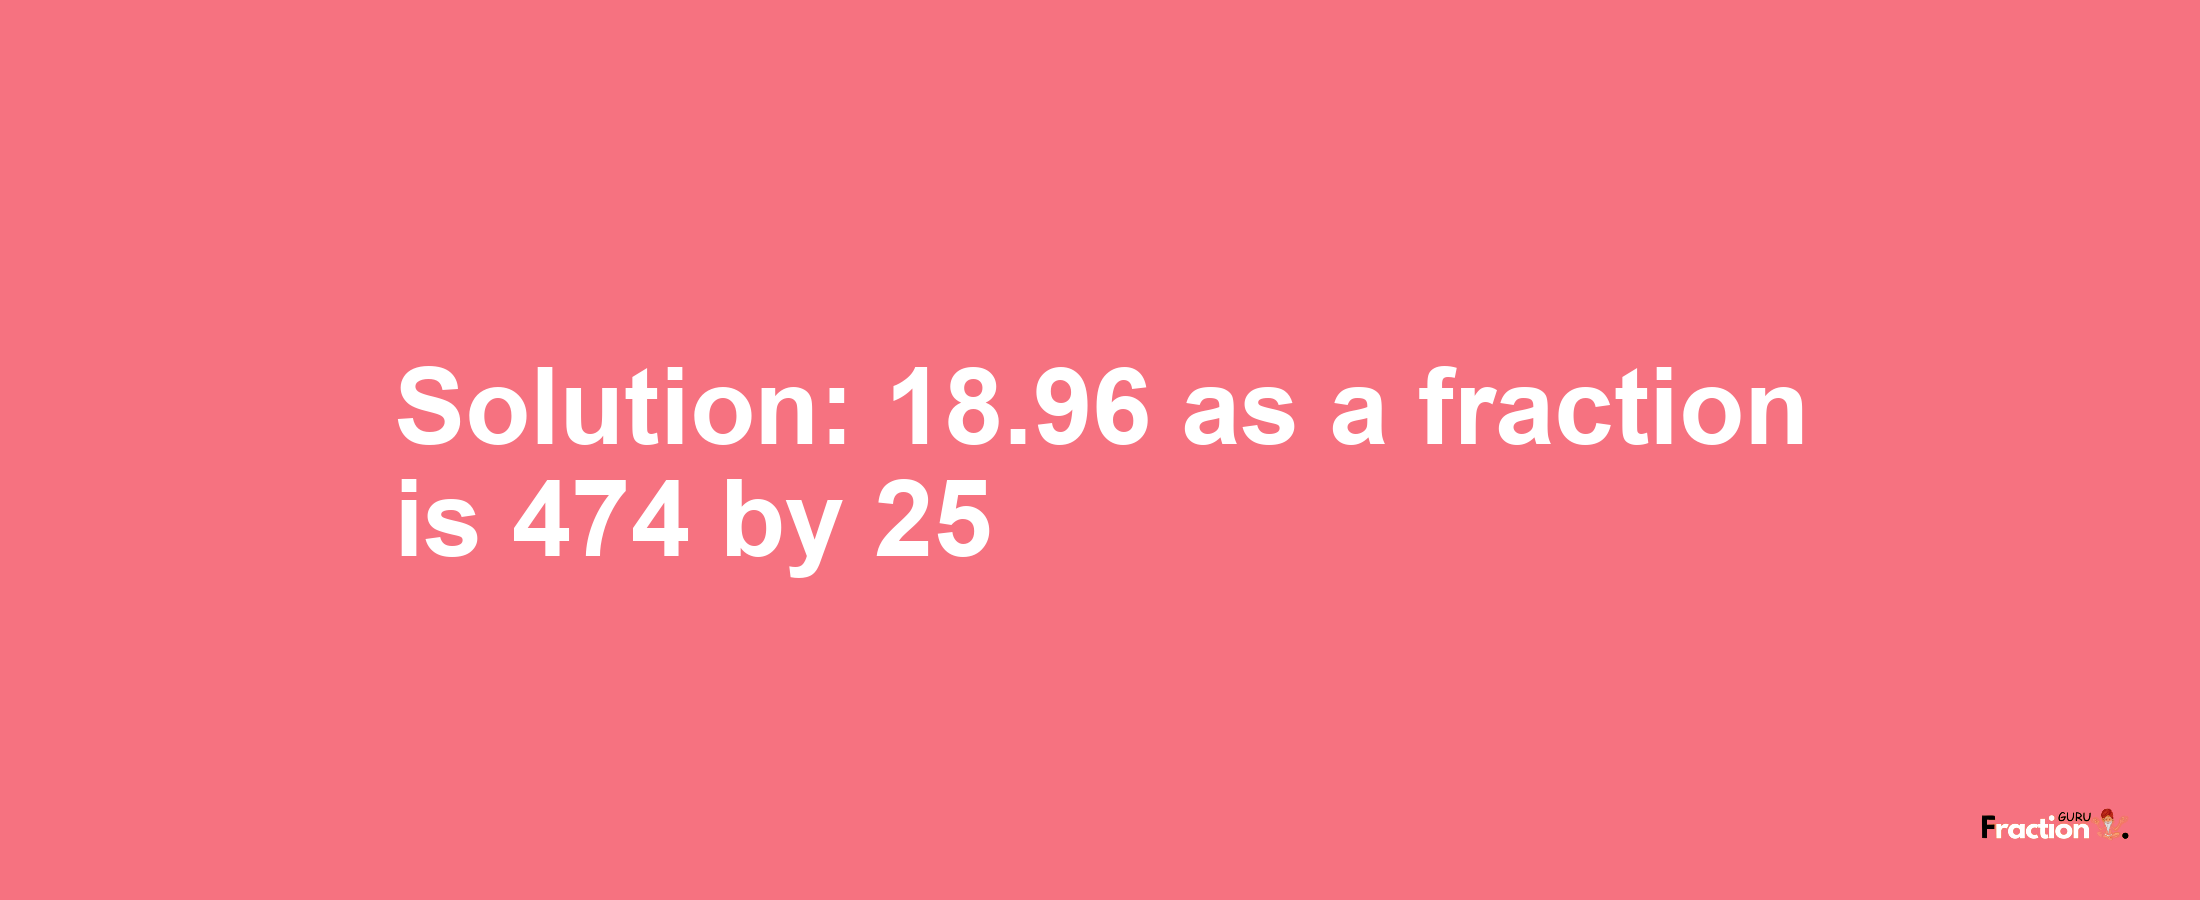 Solution:18.96 as a fraction is 474/25